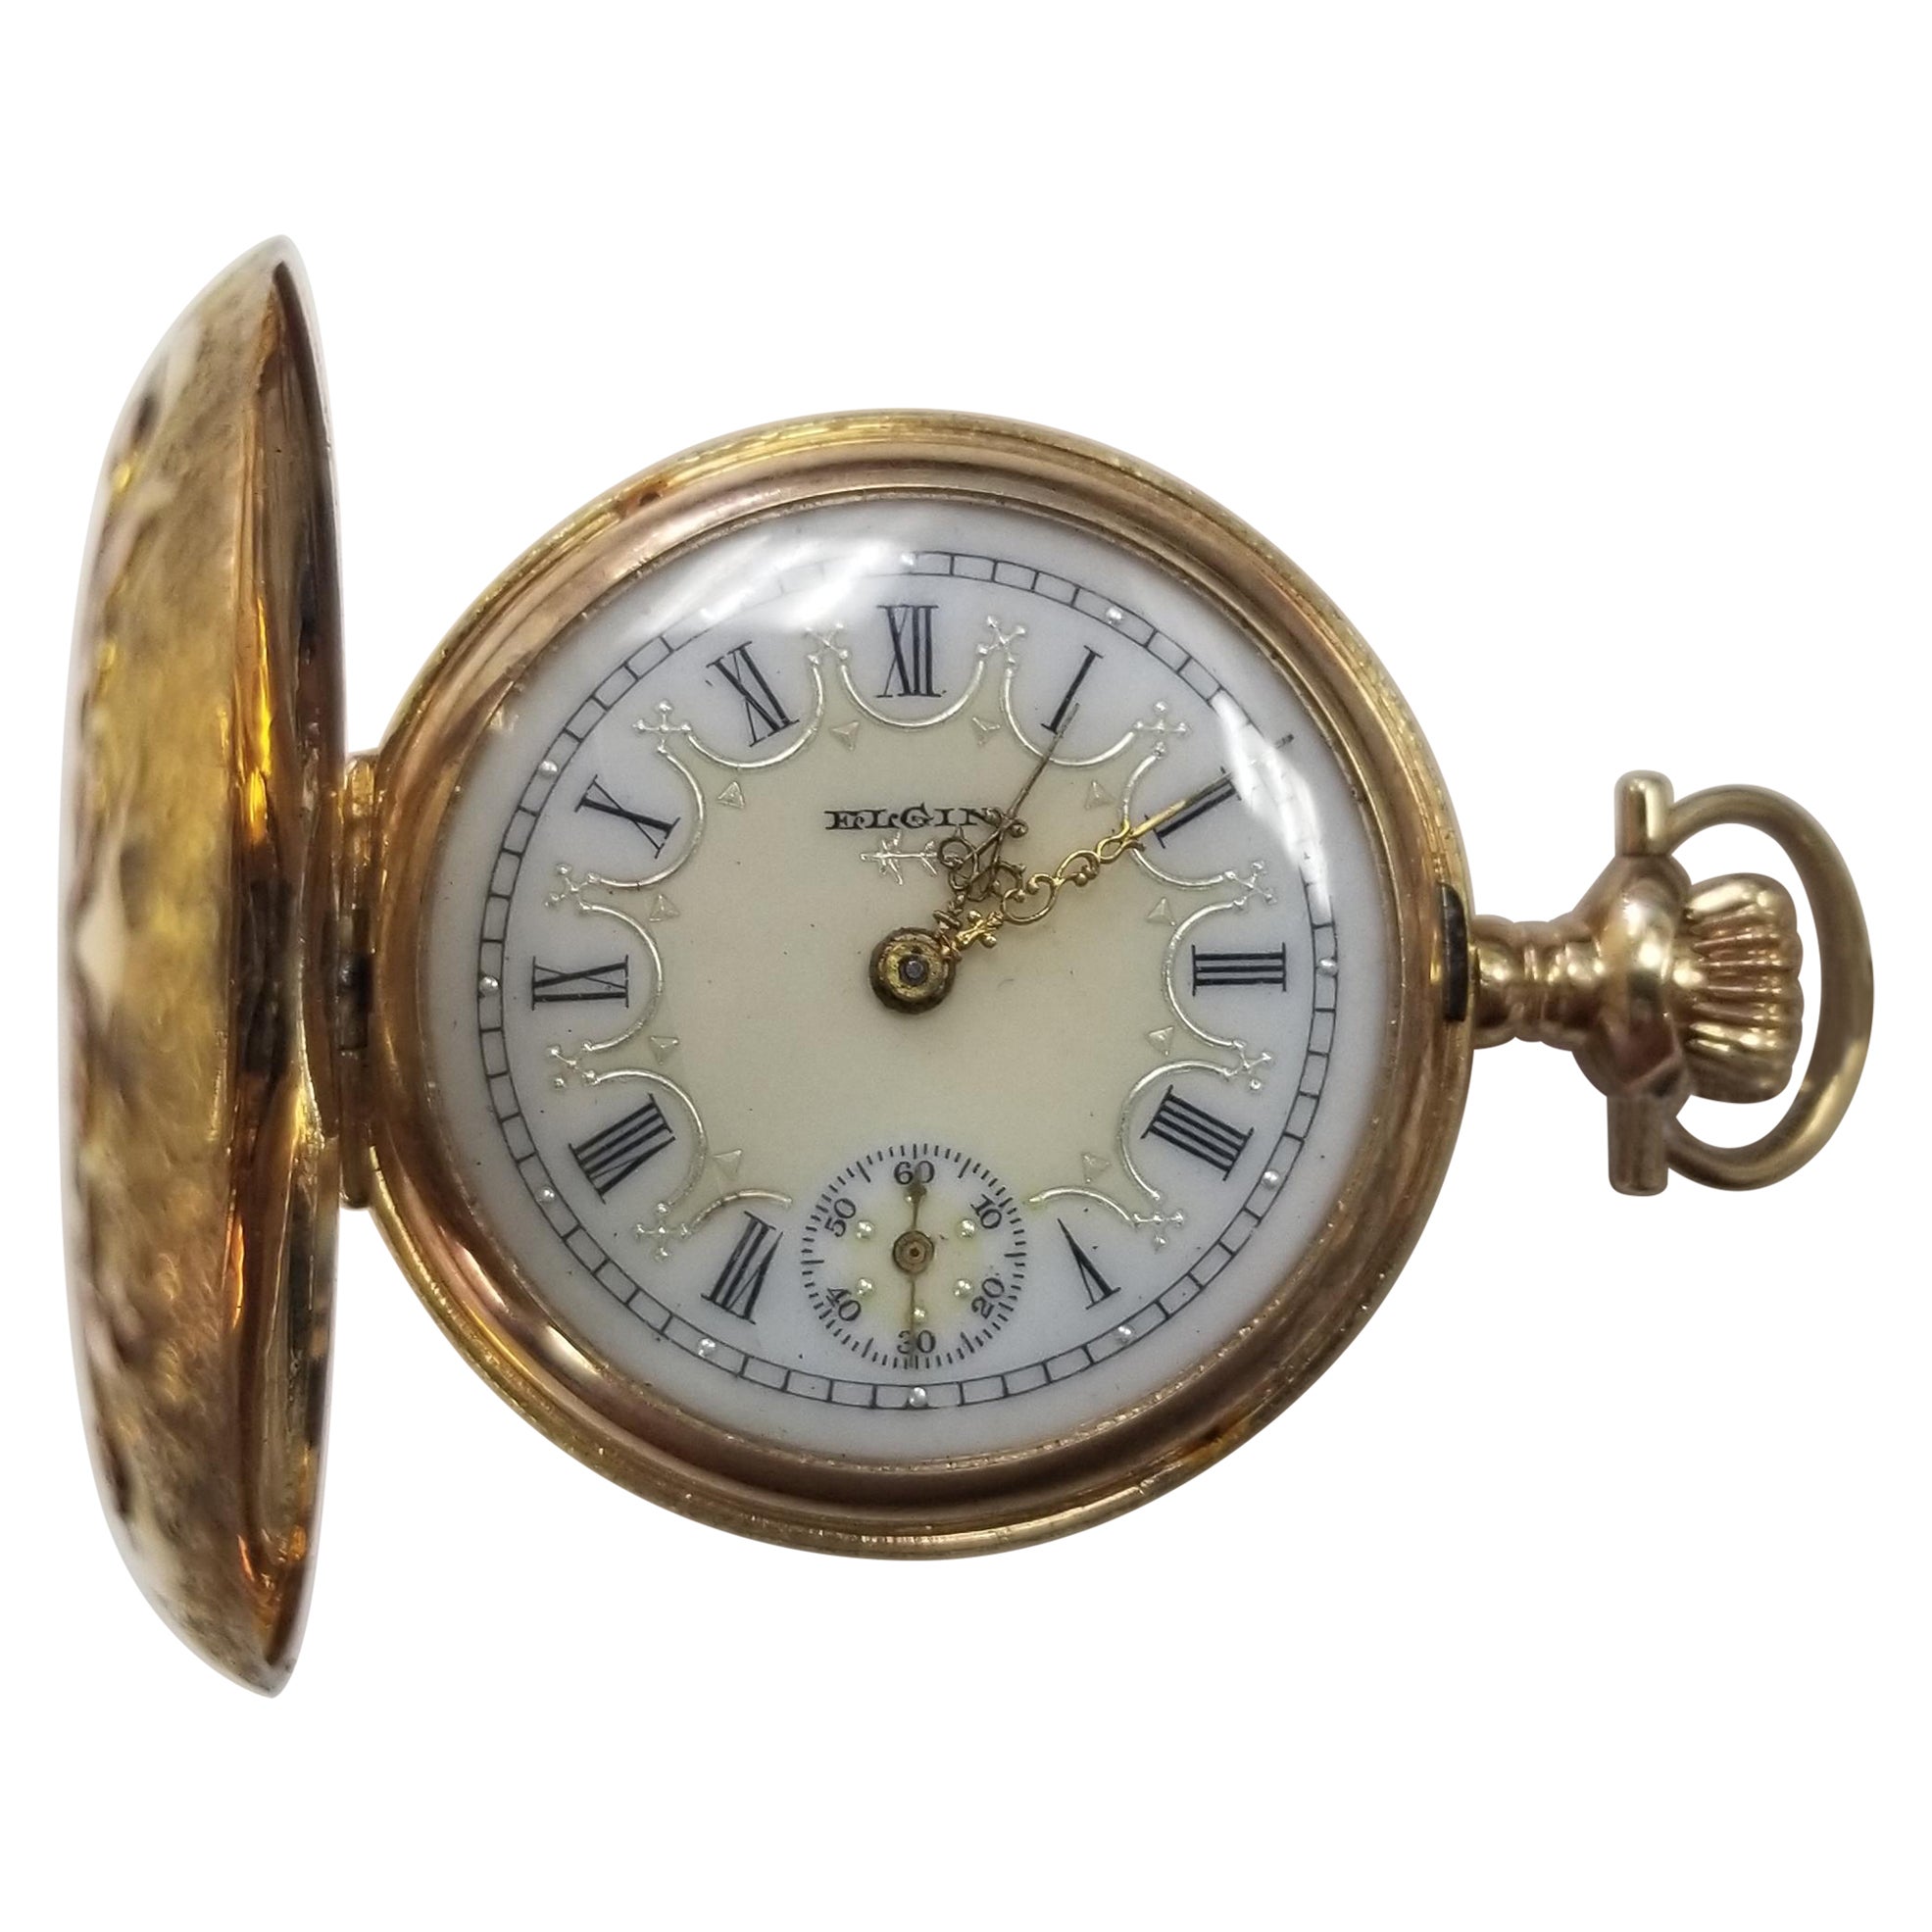 Circa 1891 Beautiful Antique Elgin Pocket Watch 14k Solid Gold Case w/White Dial